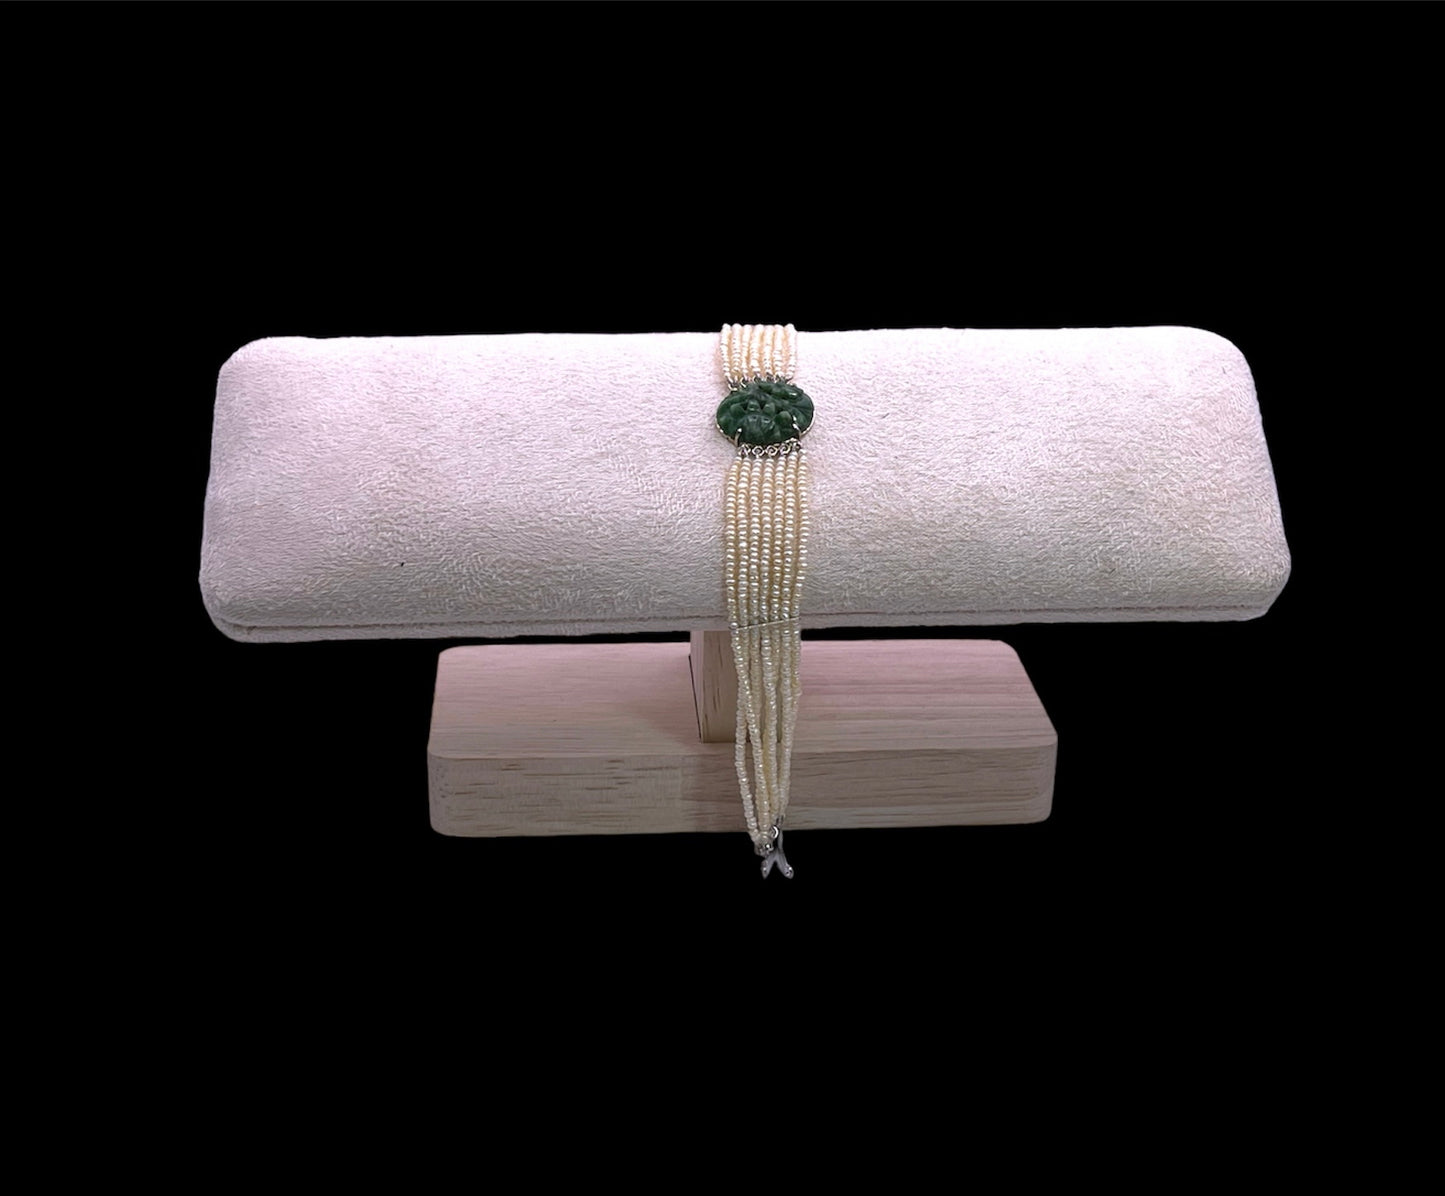 an antique seed pearl and jade plaque bracelet